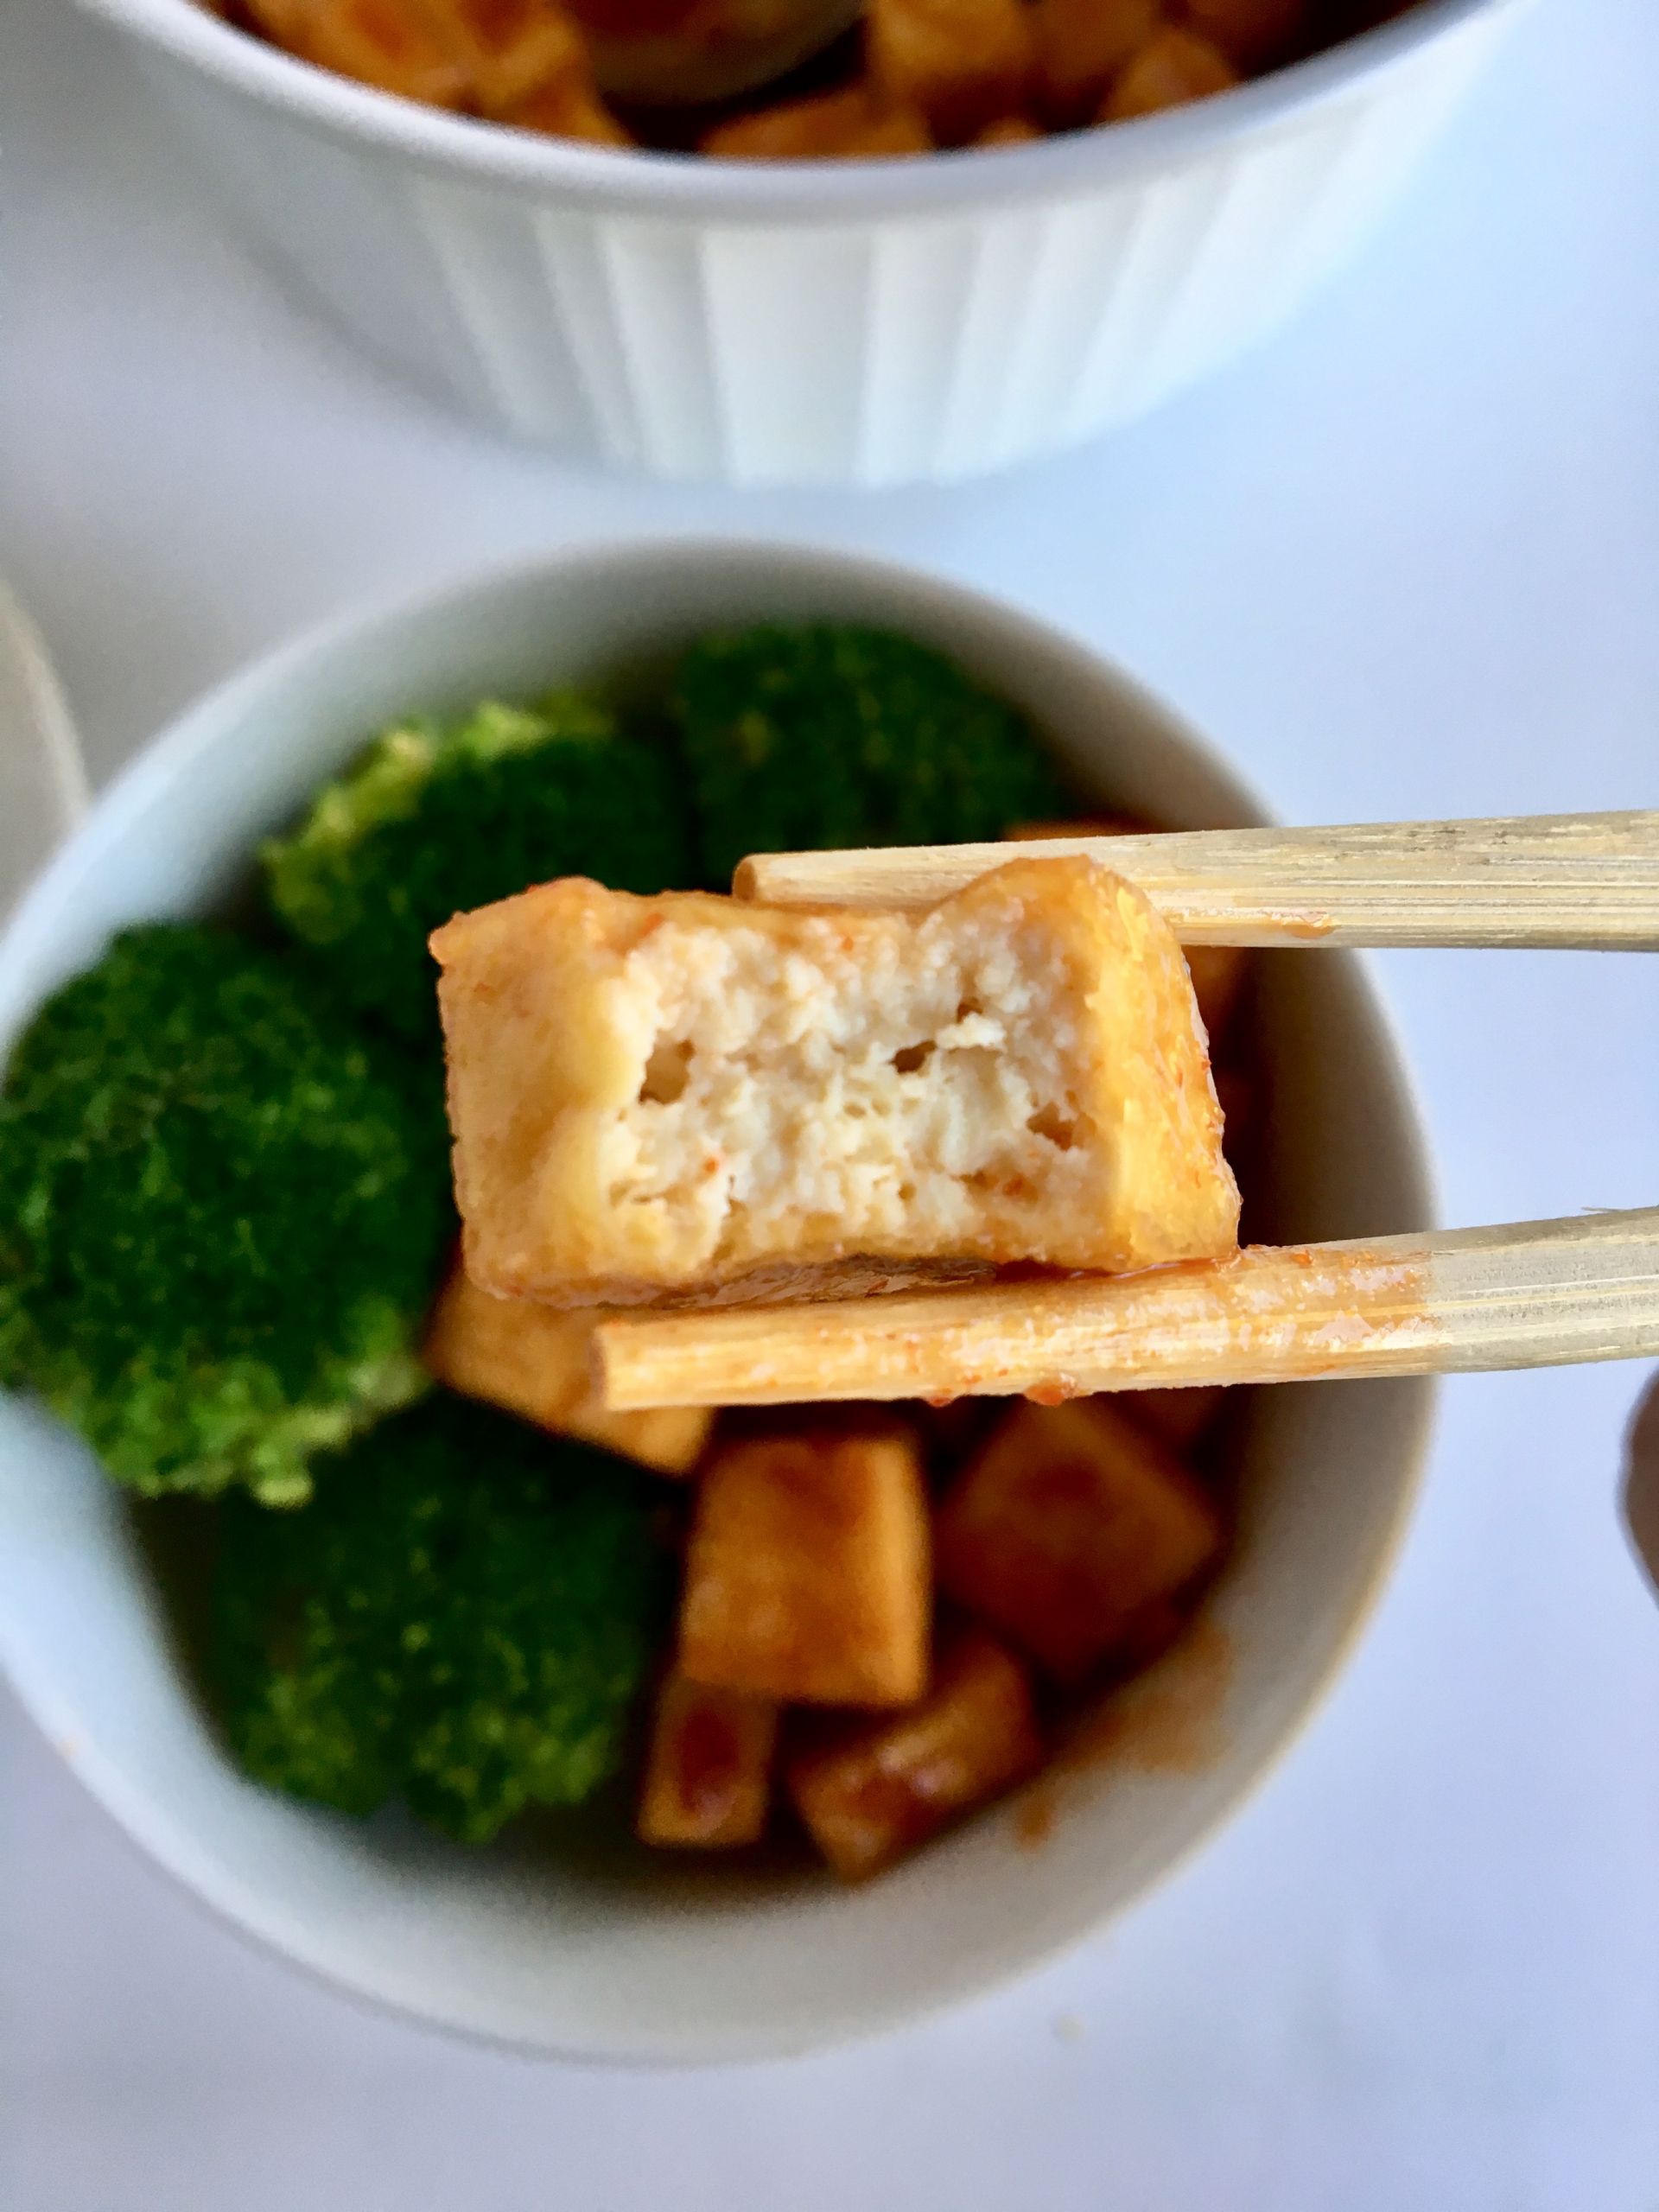 Sauces For Tofu
 Air Fried Tofu in a Sweet Sriracha Sauce a quick & easy